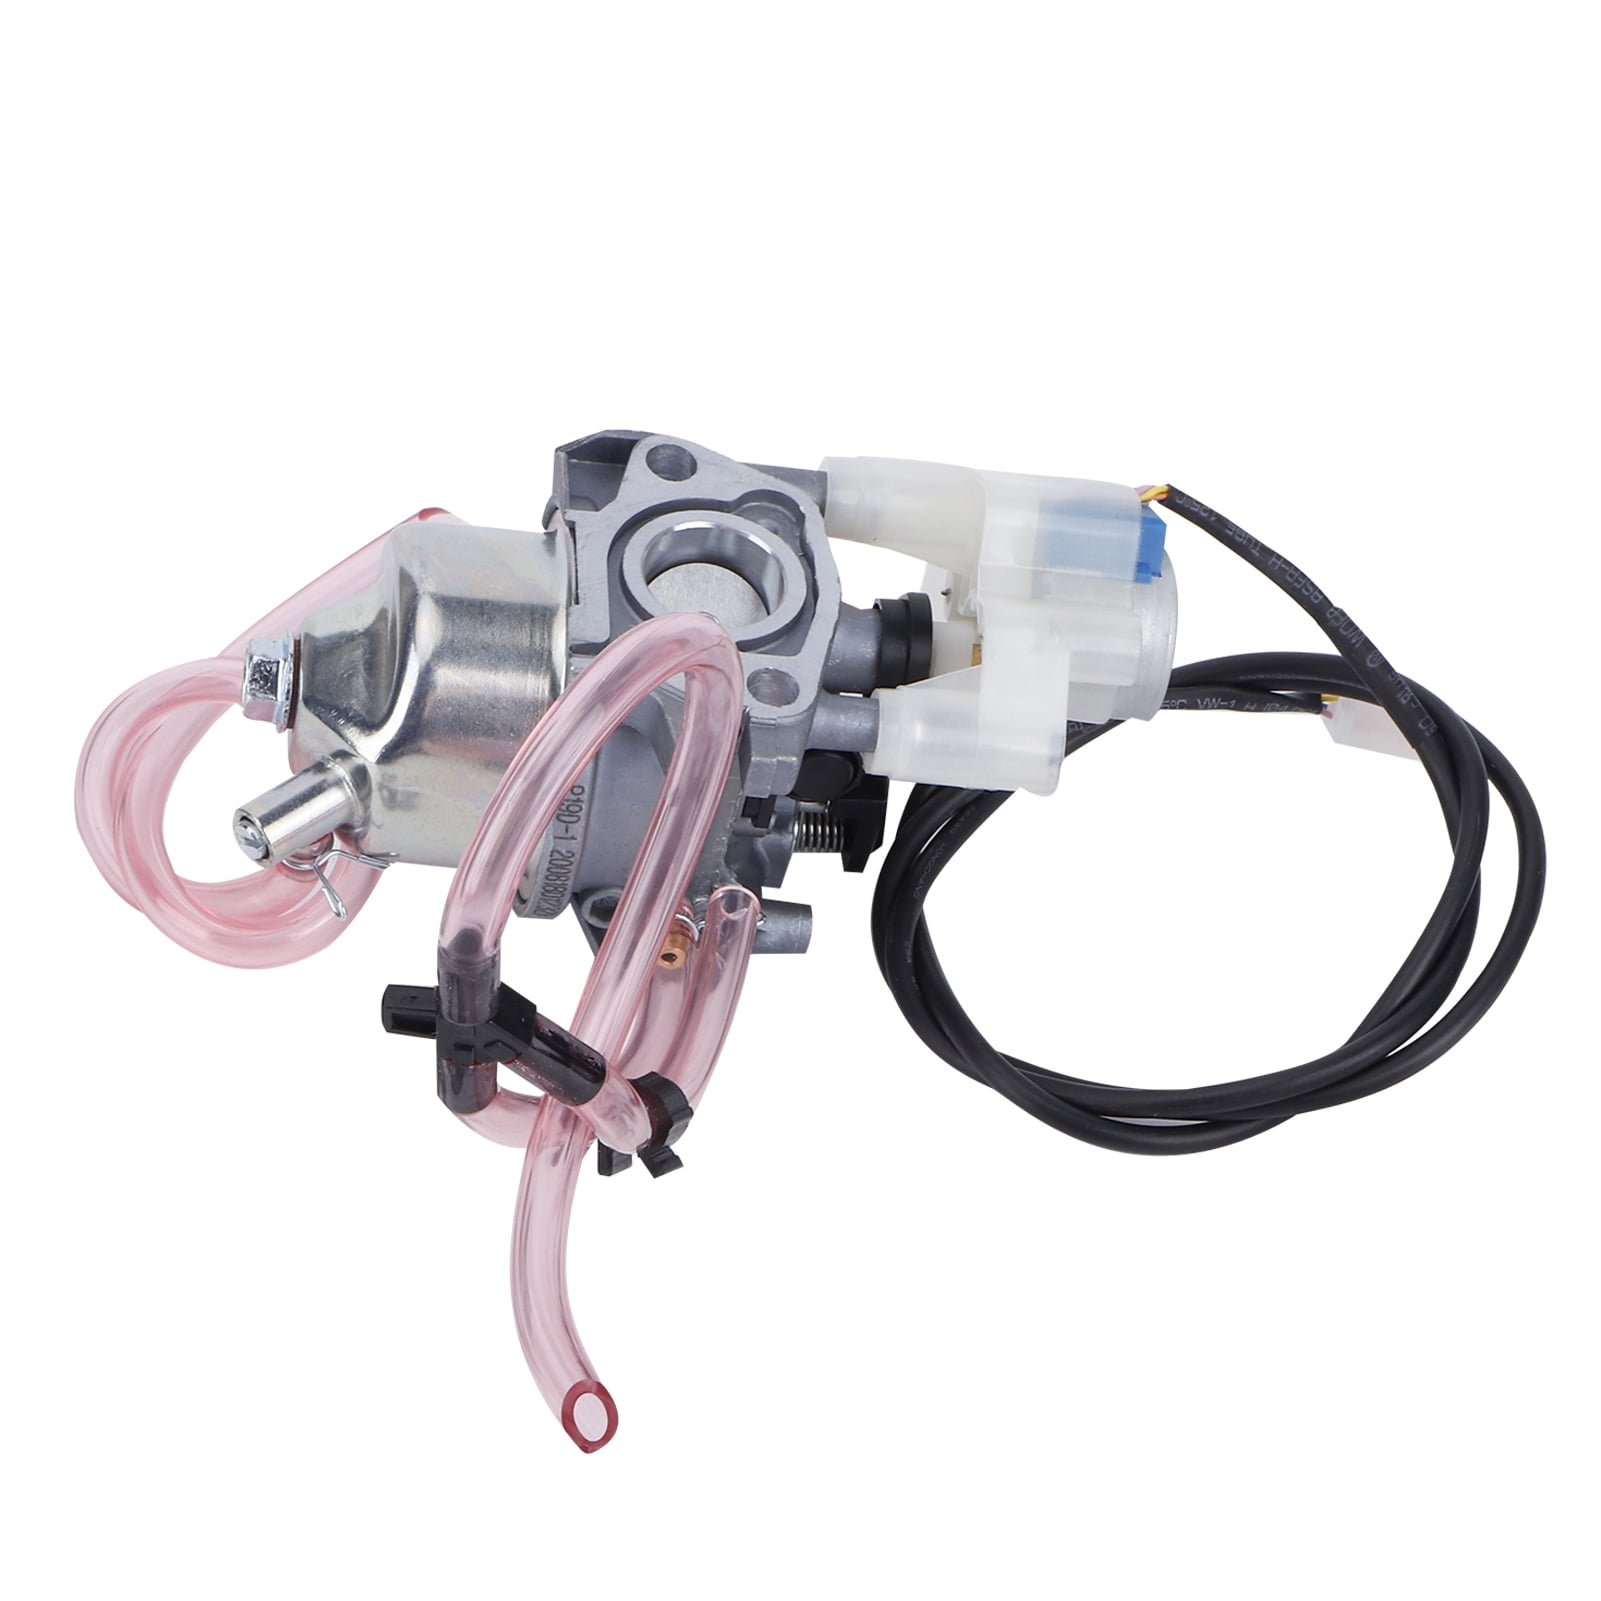 Ignition Switch for Honda Eu3000is EU3000IS1 Inverter 196cc 2.8kw 3kw 6 Wire Key for sale online 